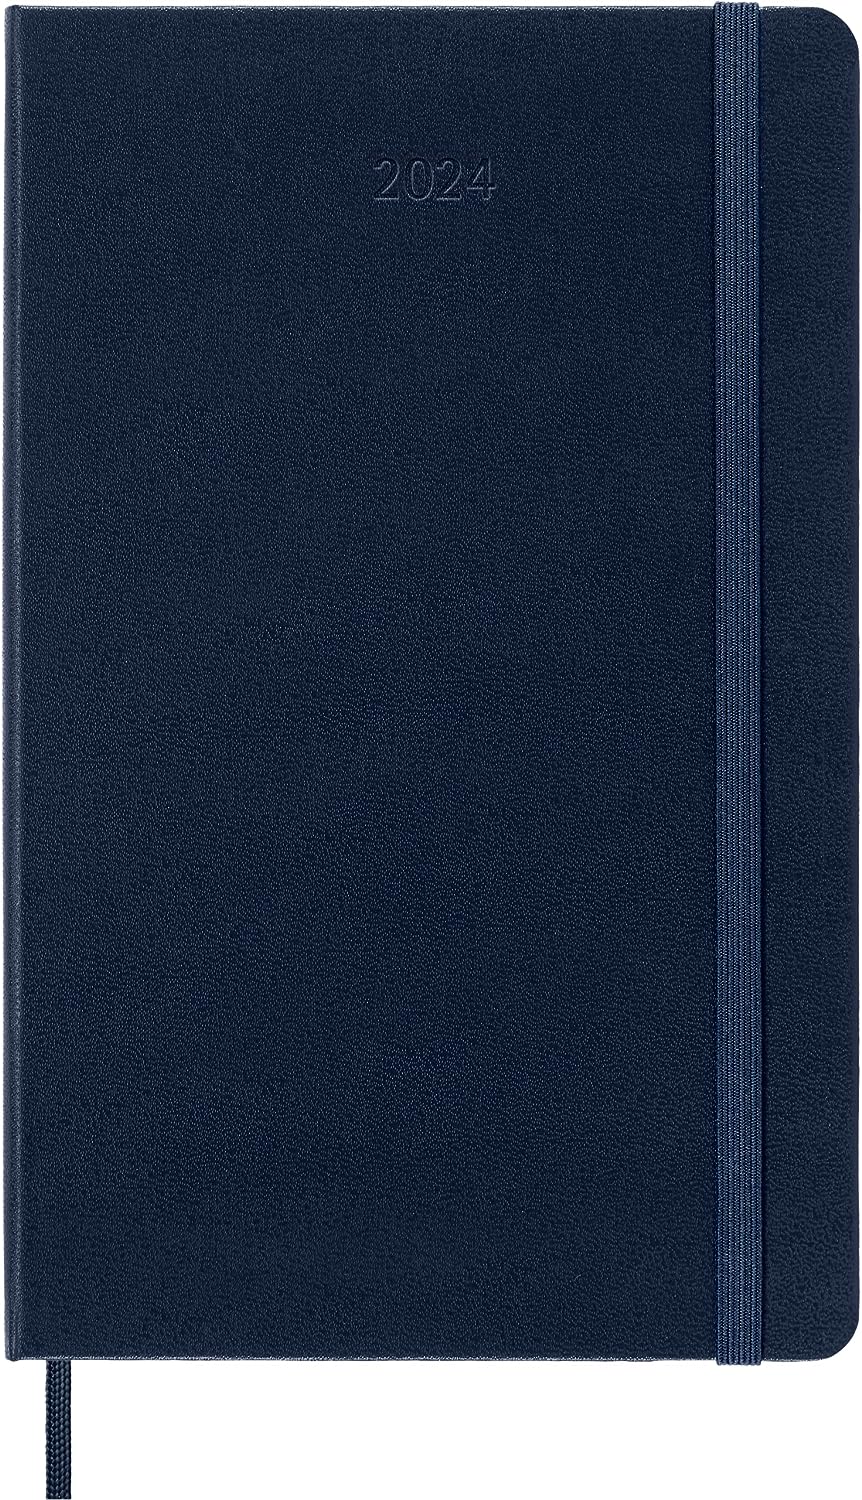 Agenda 2024 - 12-Month Weekly - Large, Hard Cover - Sapphire Blue | Moleskine